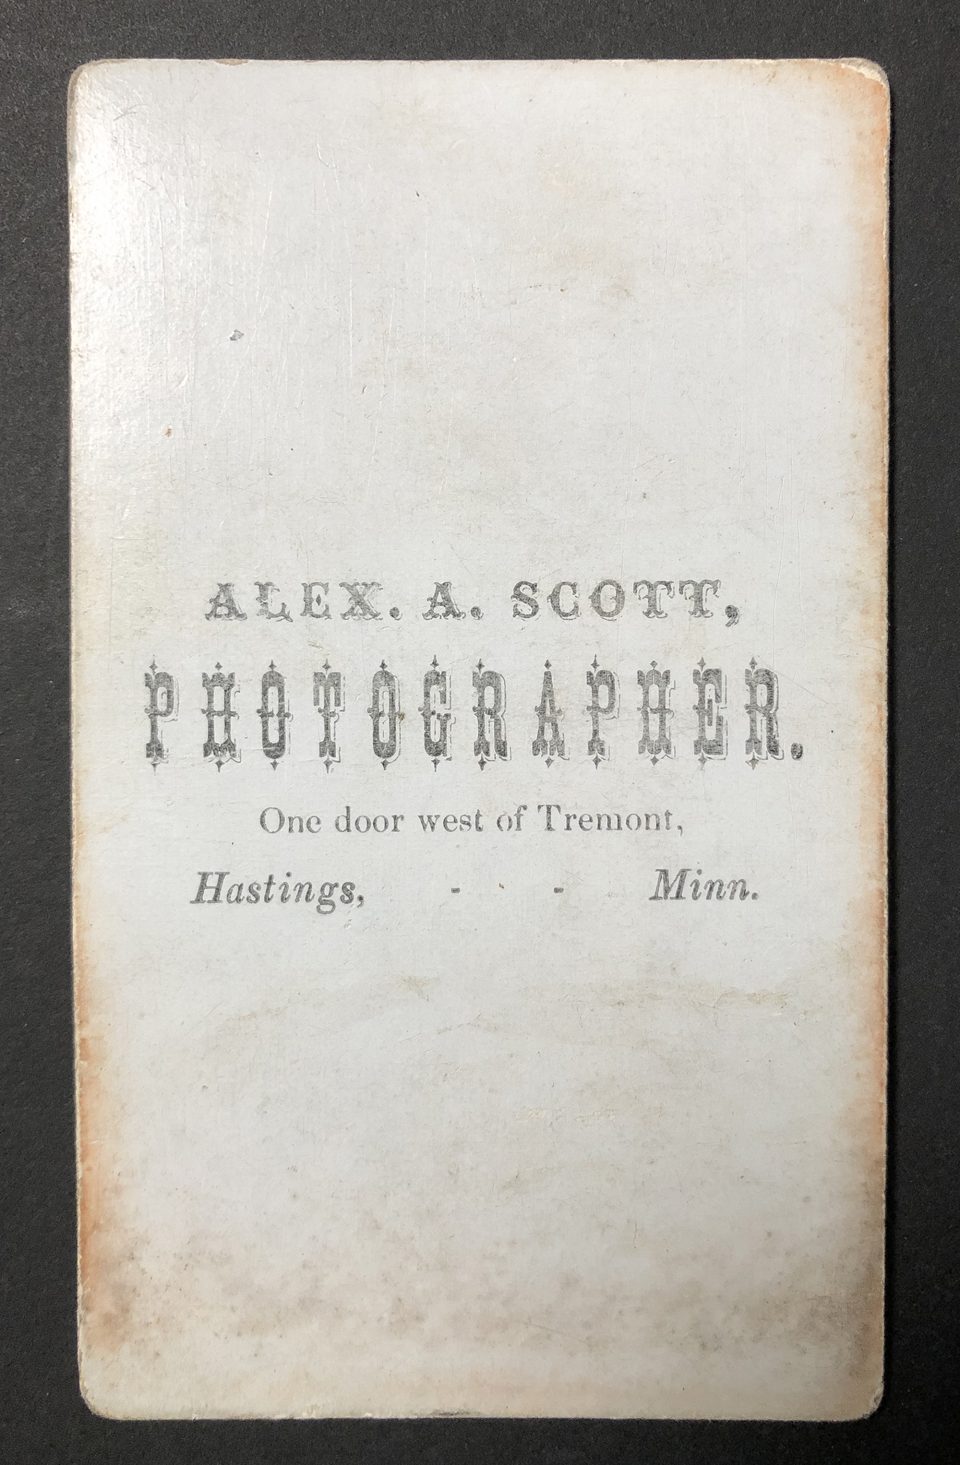 The verso of this carte de visite says "Alex A. Scott, Photographer. One door west of Tremont, Hastings, Minn."